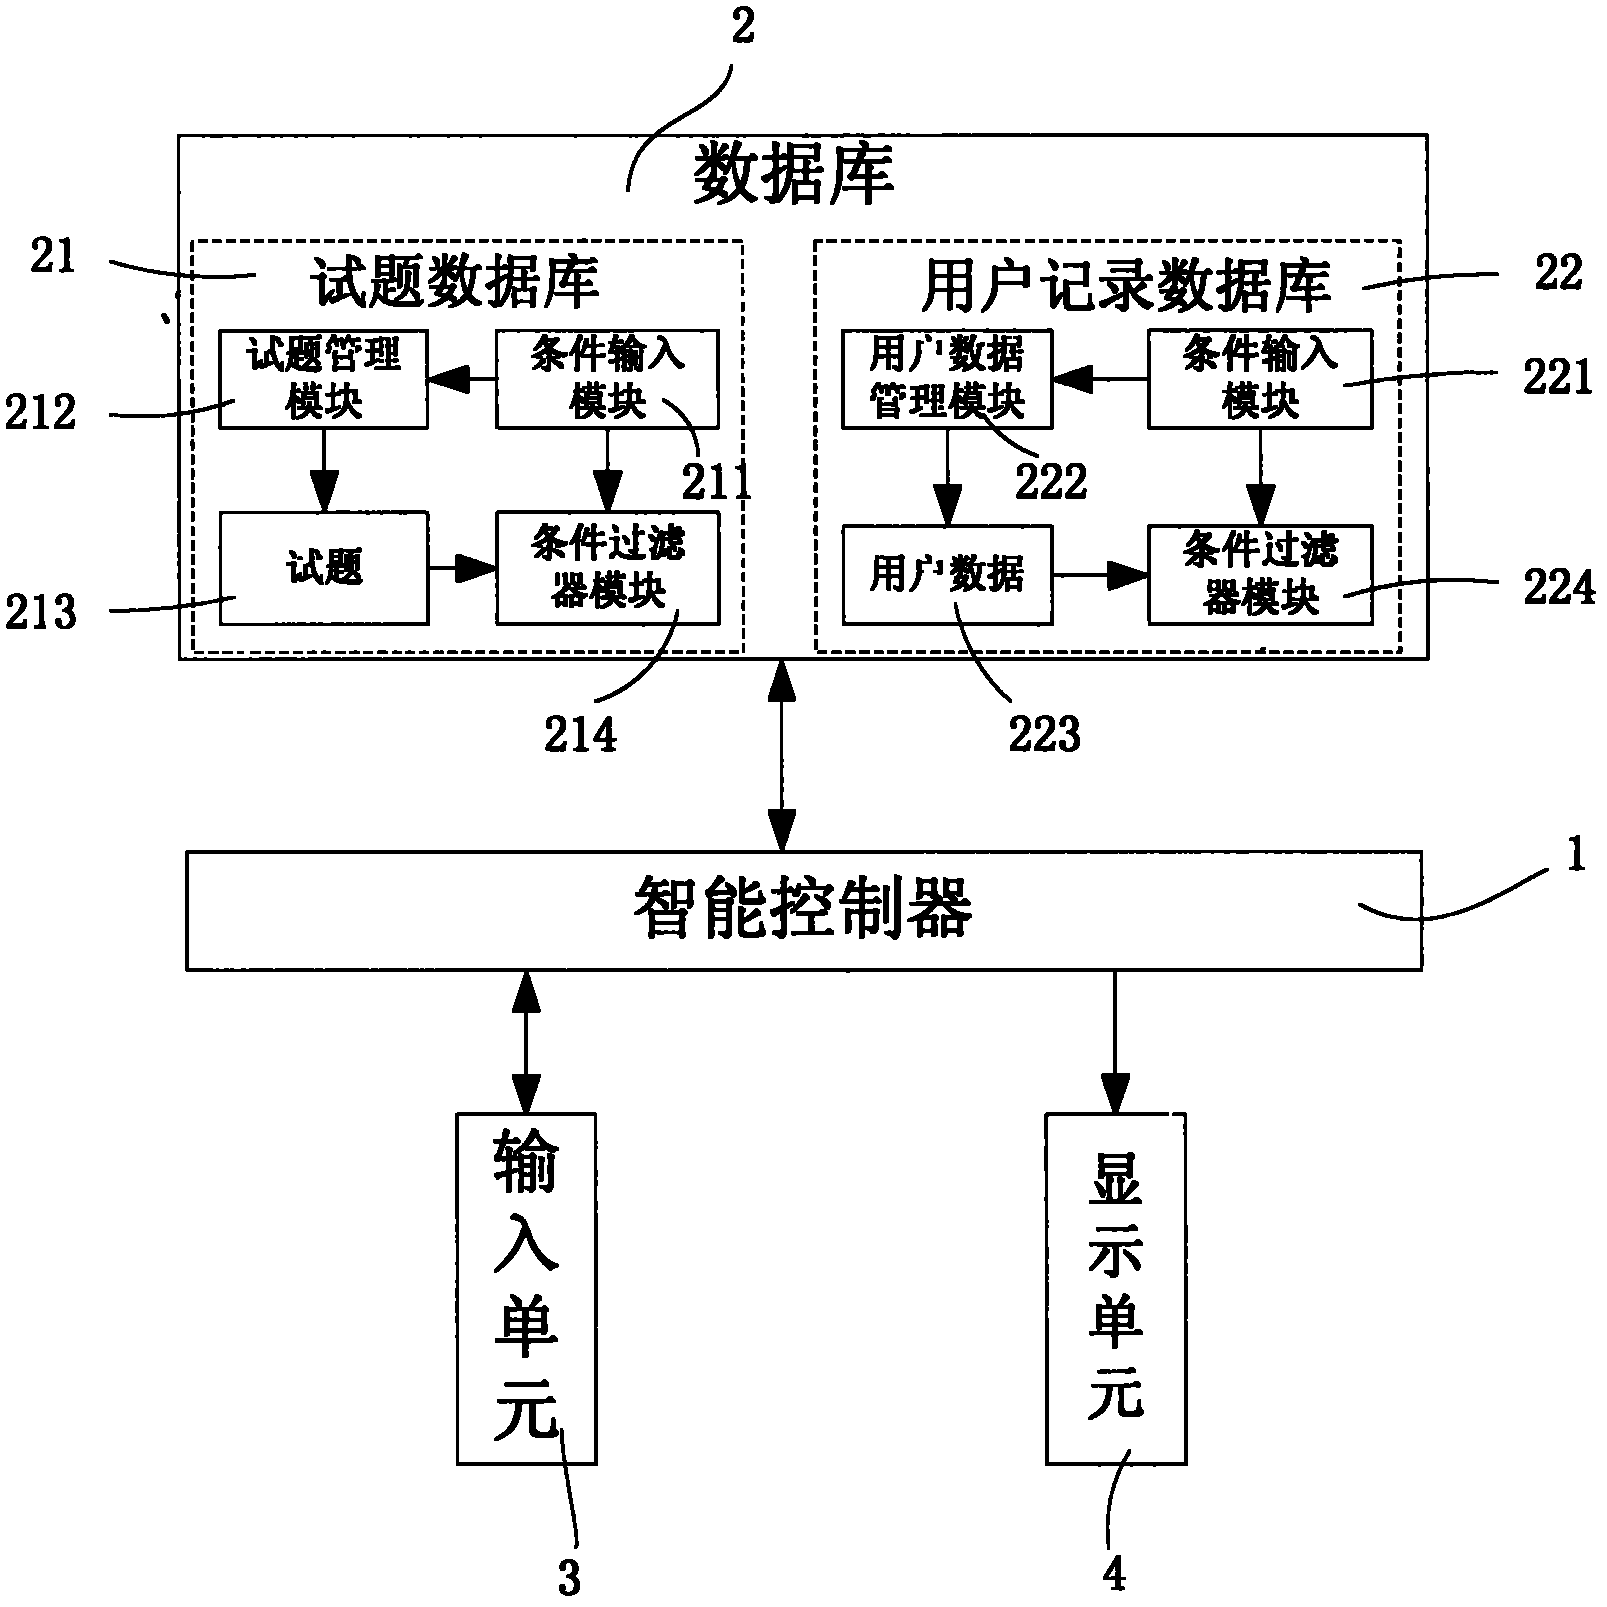 Test question generation system and implementation method thereof